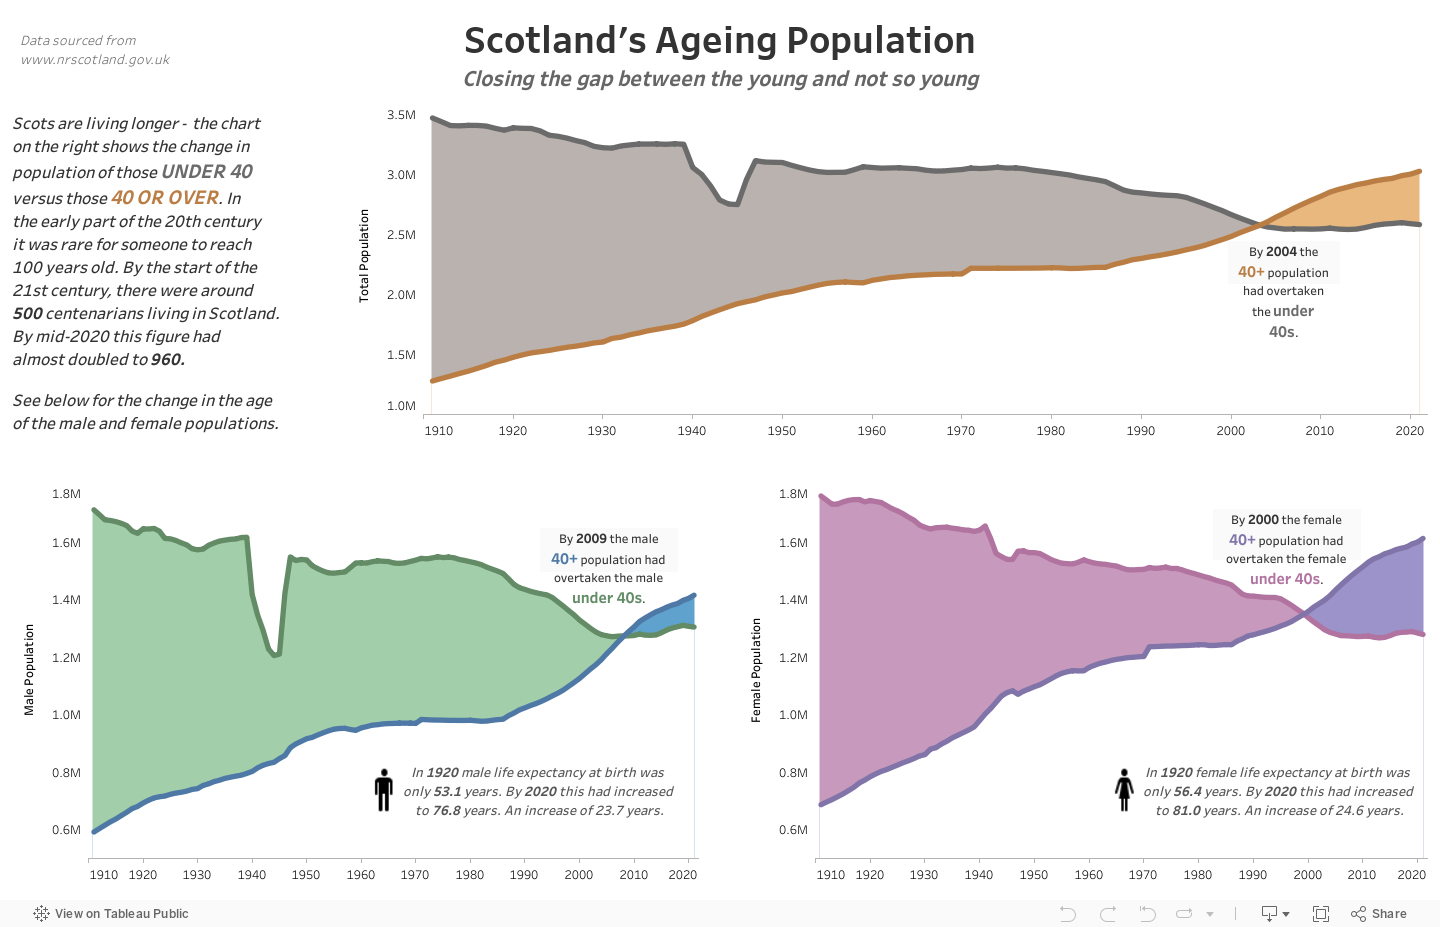 Scotland's Ageing PopulationClosing the gap between the young and not so young 